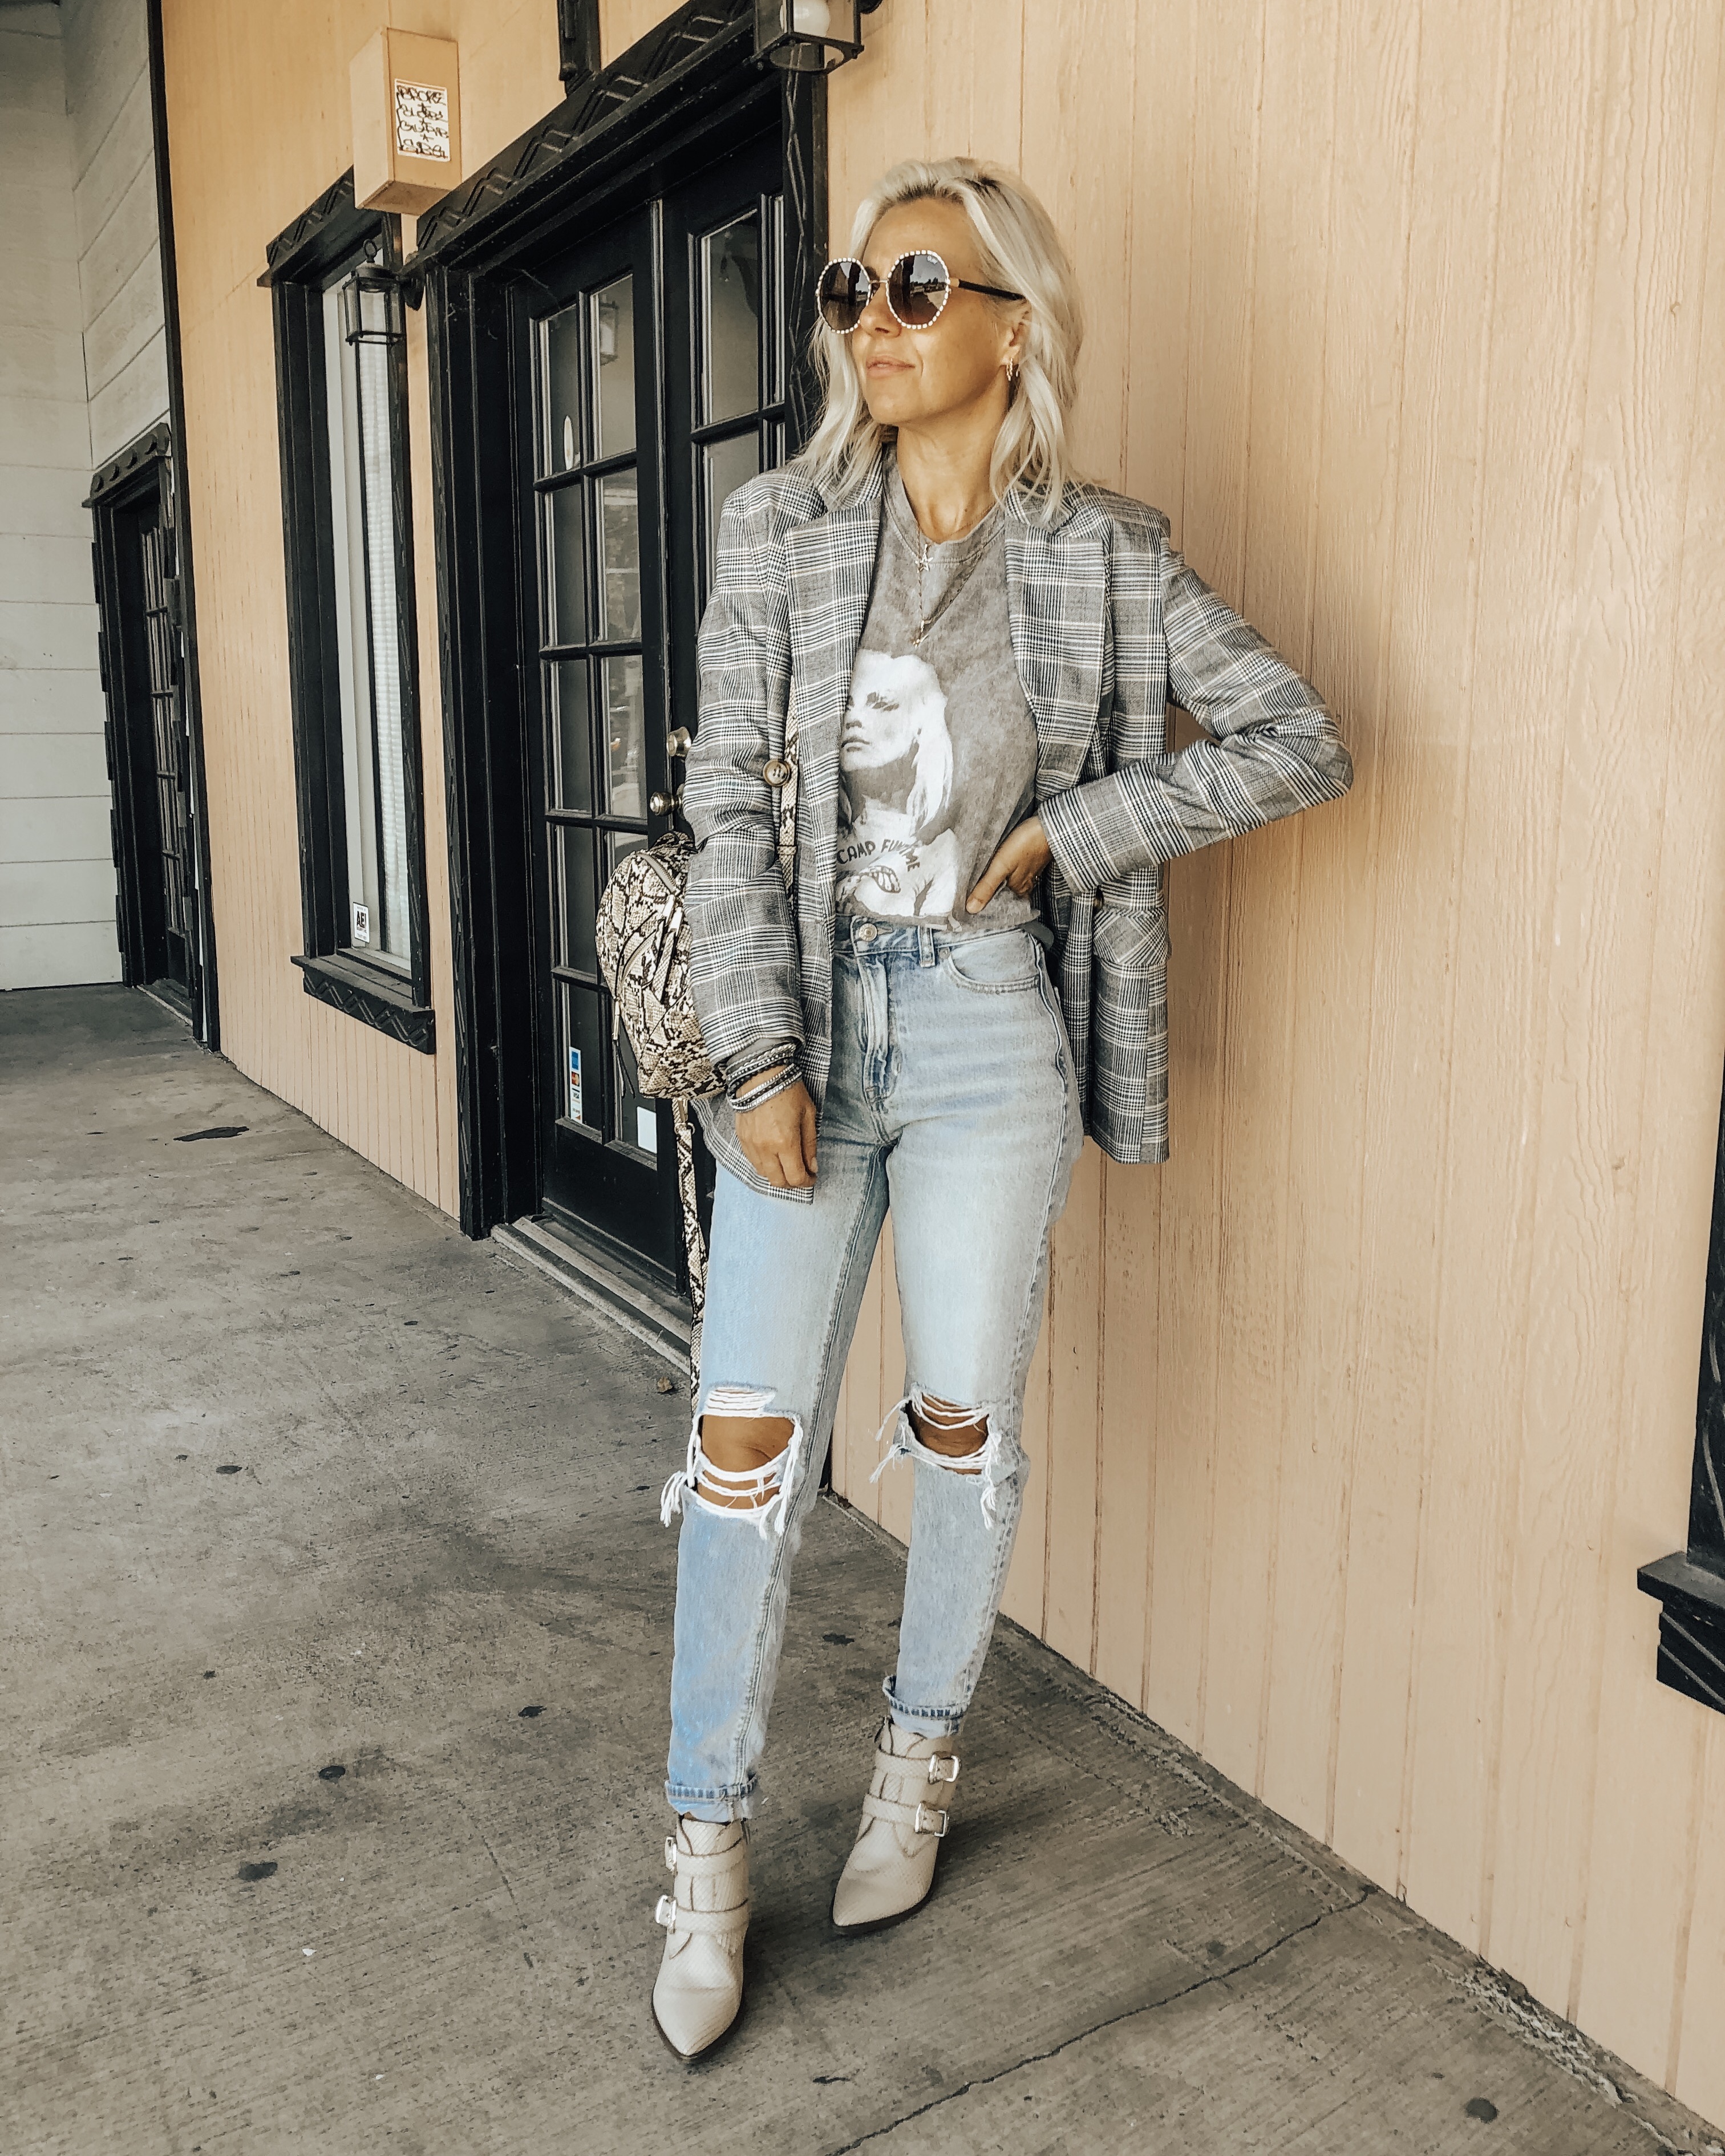 THE BLAZER- A MUST HAVE PIECE FOR FALL- Jaclyn De Leon Style + one big trend this season is the boyfriend blazer. I paired this plaid one with a graphic tee and mom jeans. I'm sharing all the best affordable blazers